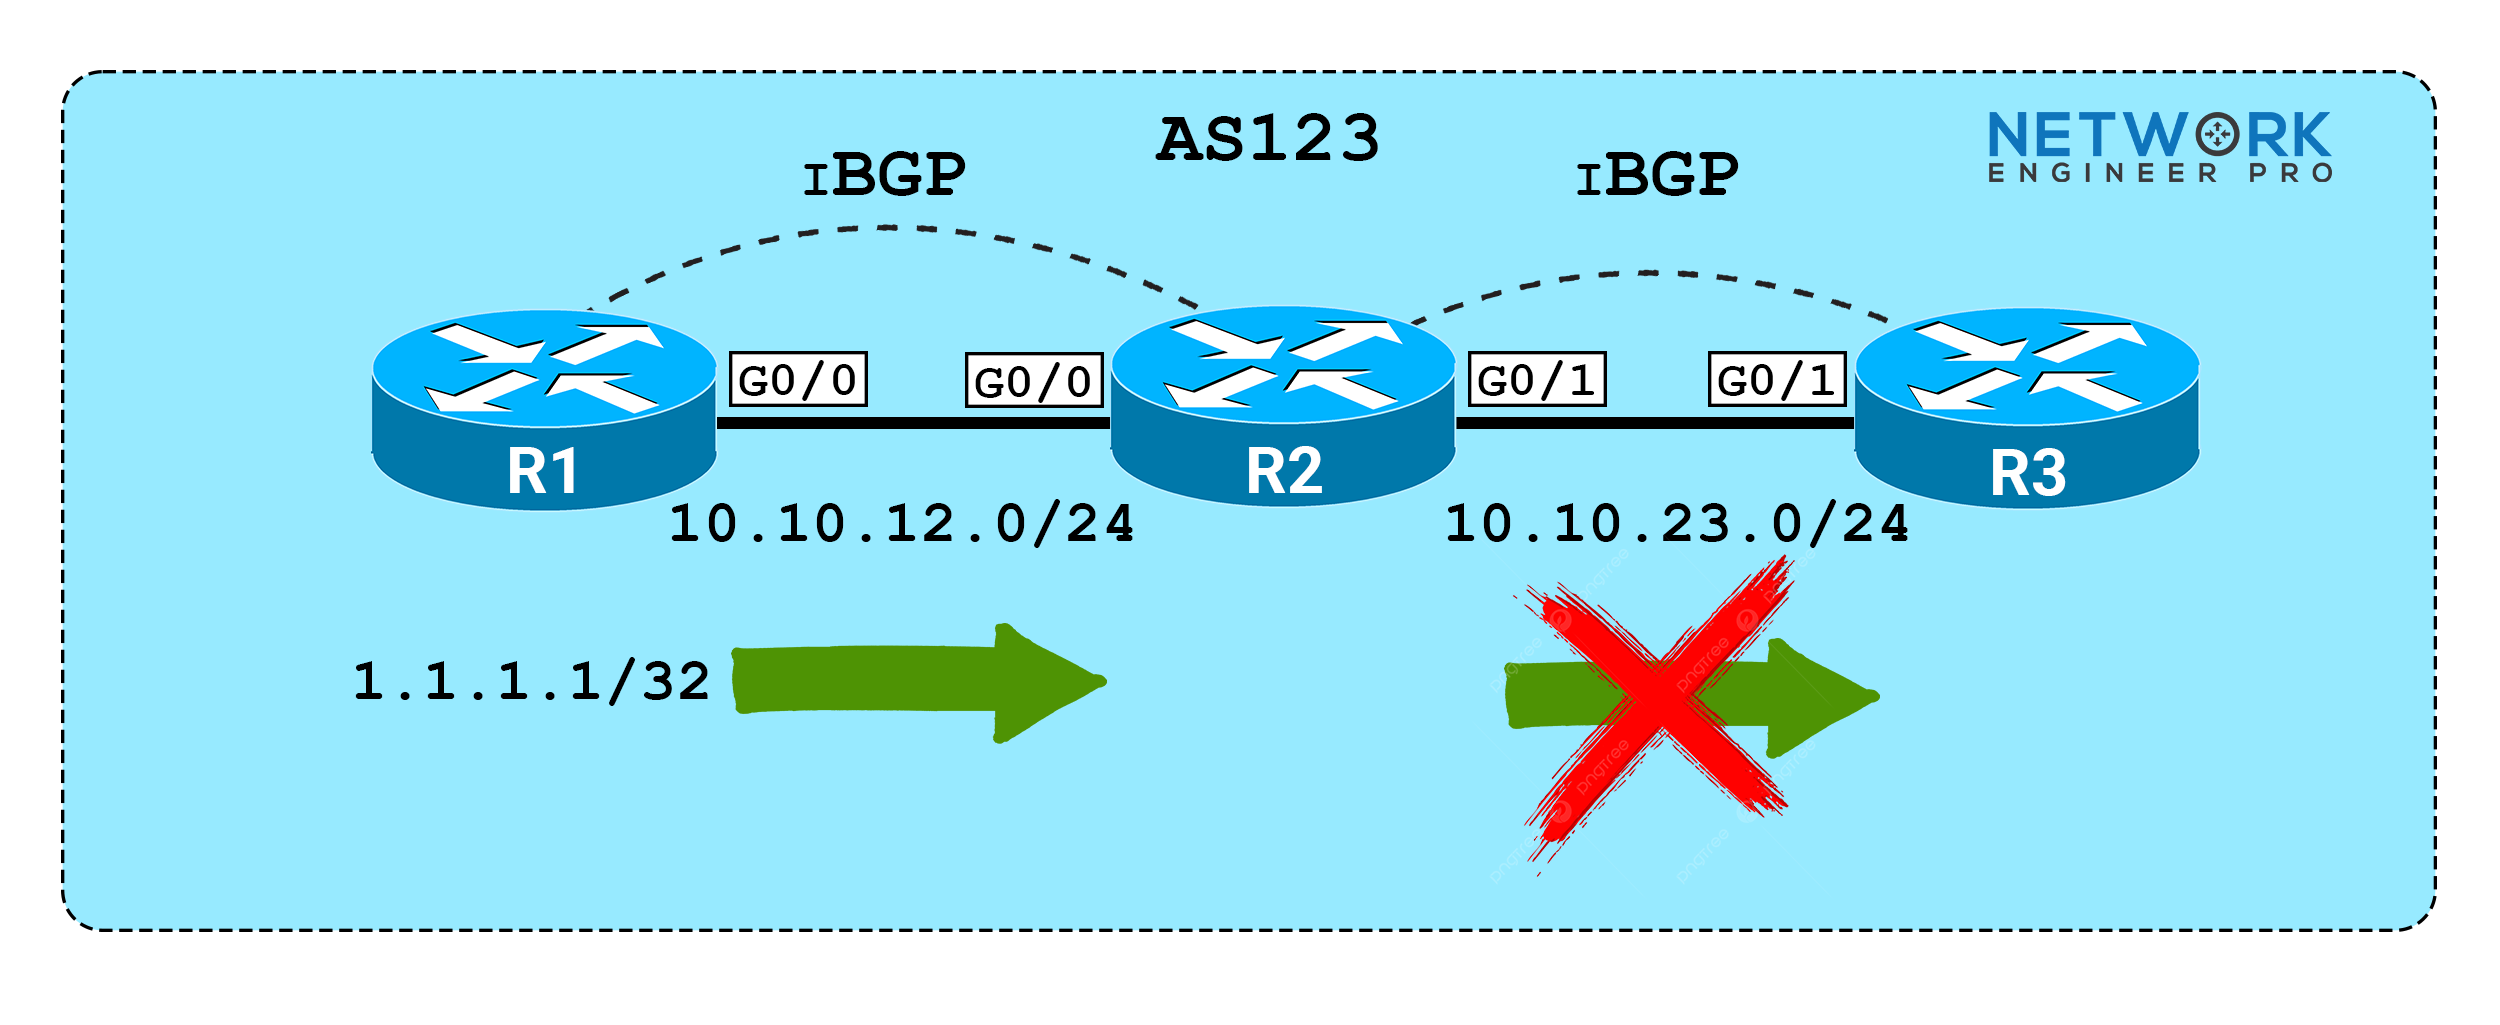 Network topology diagram showing the need for full mesh ibgp due to split horizon rule preventing route advertisement in BGP.